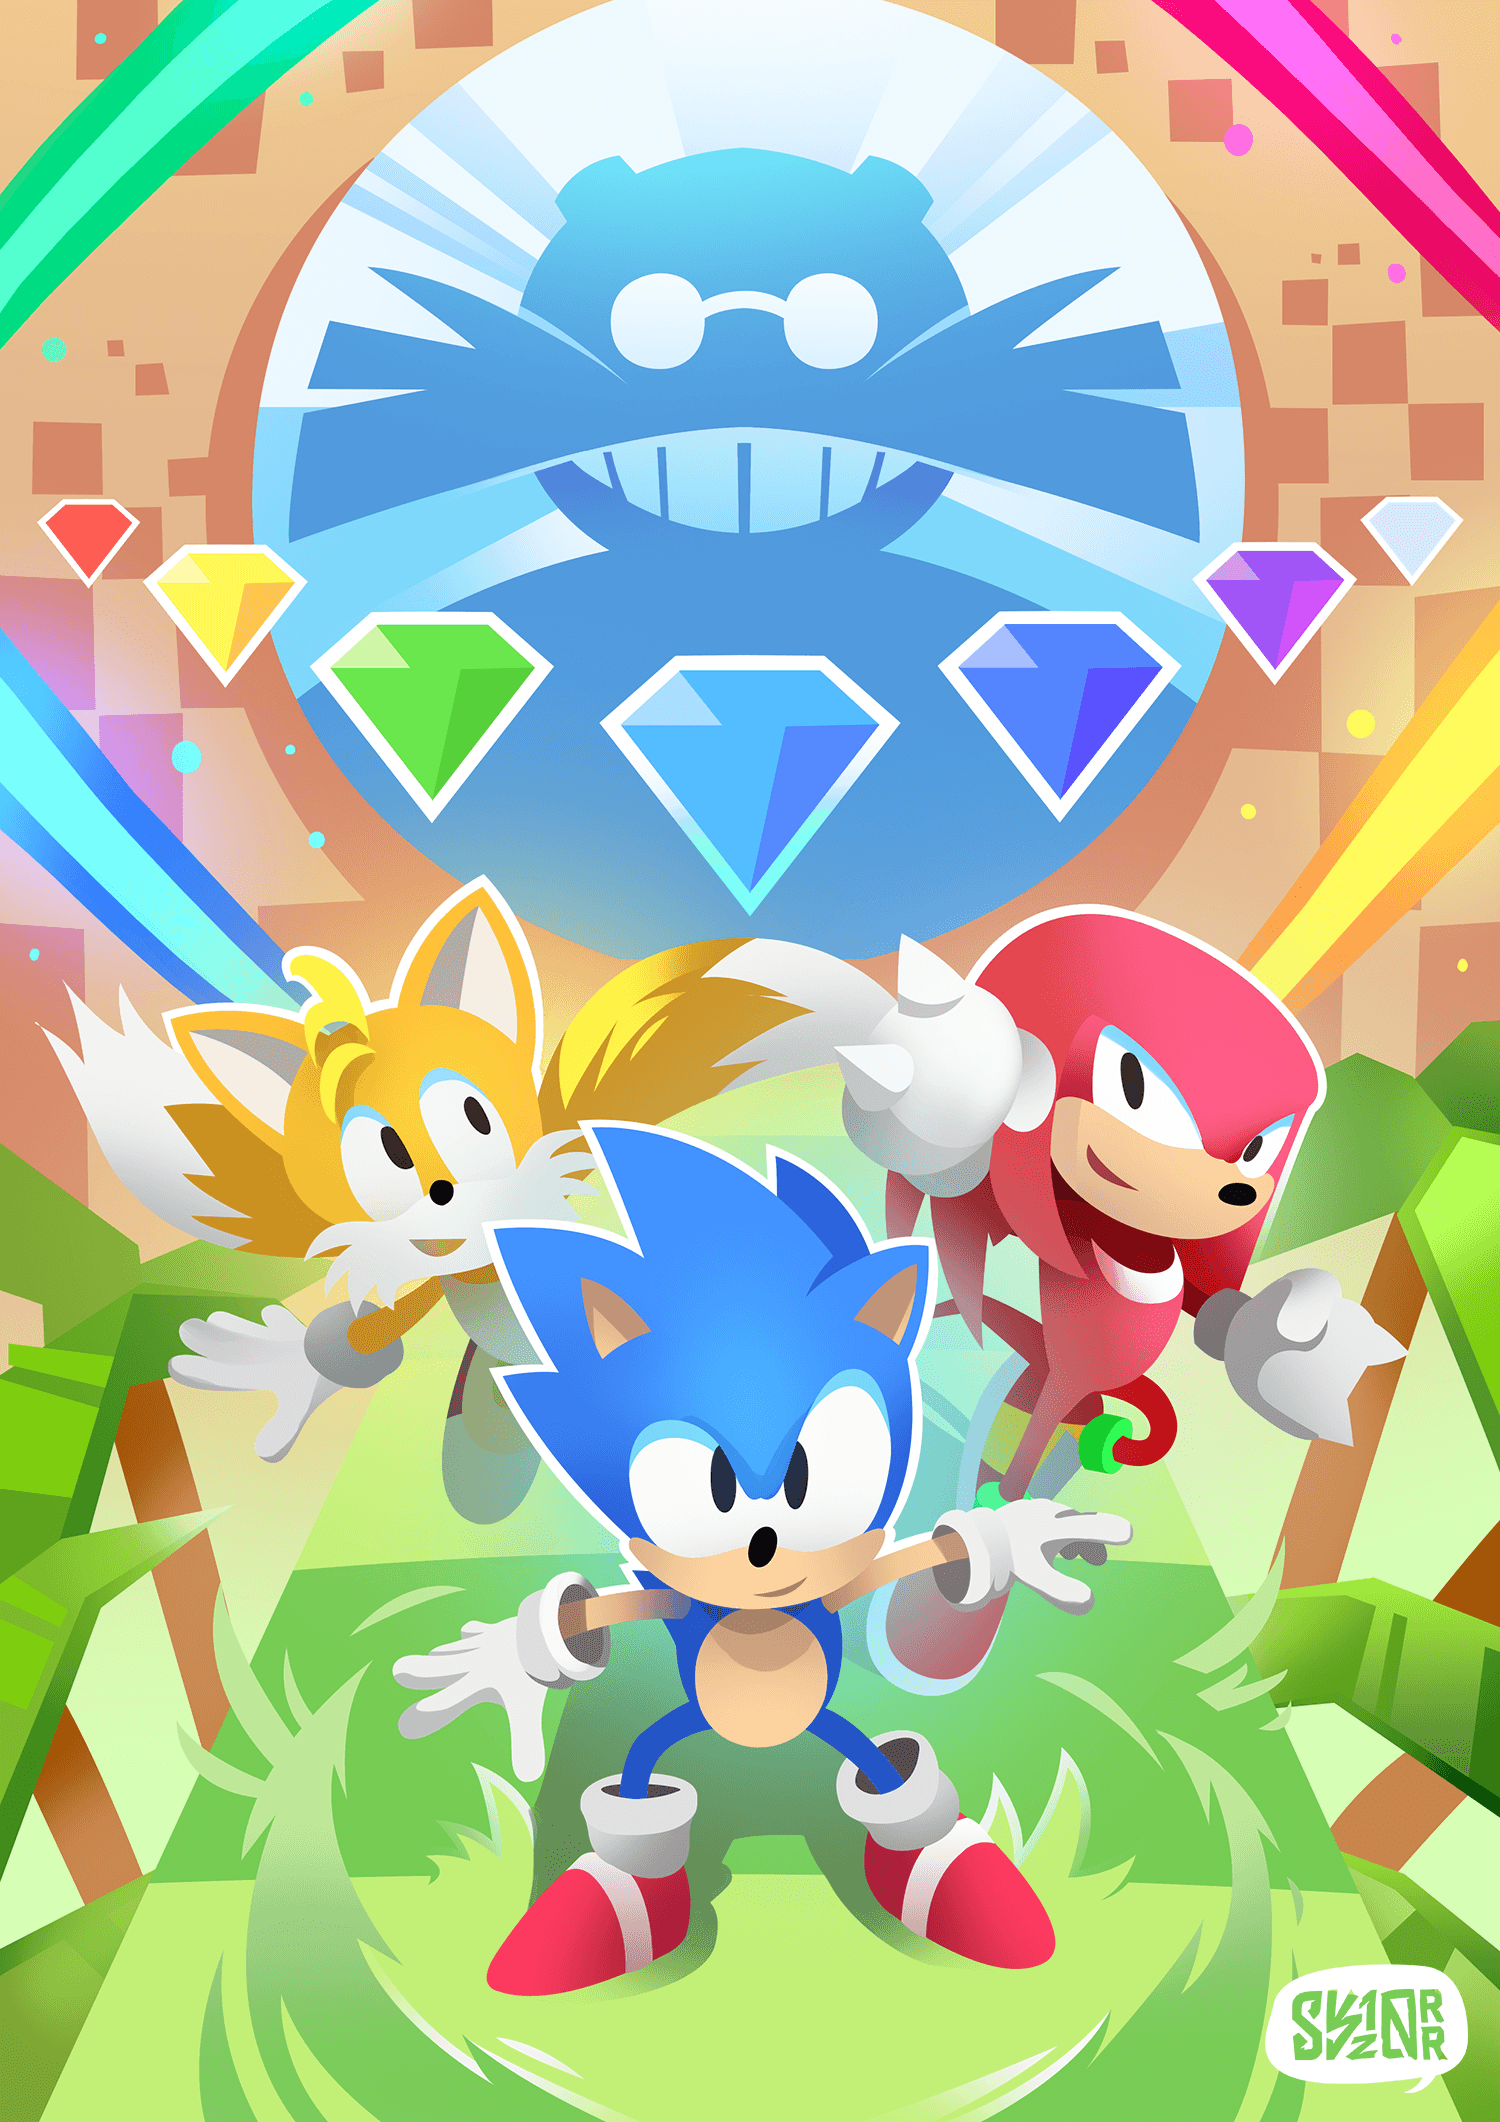 Hey! I made a Sonic Mania Movie Poster for anyone to use as a